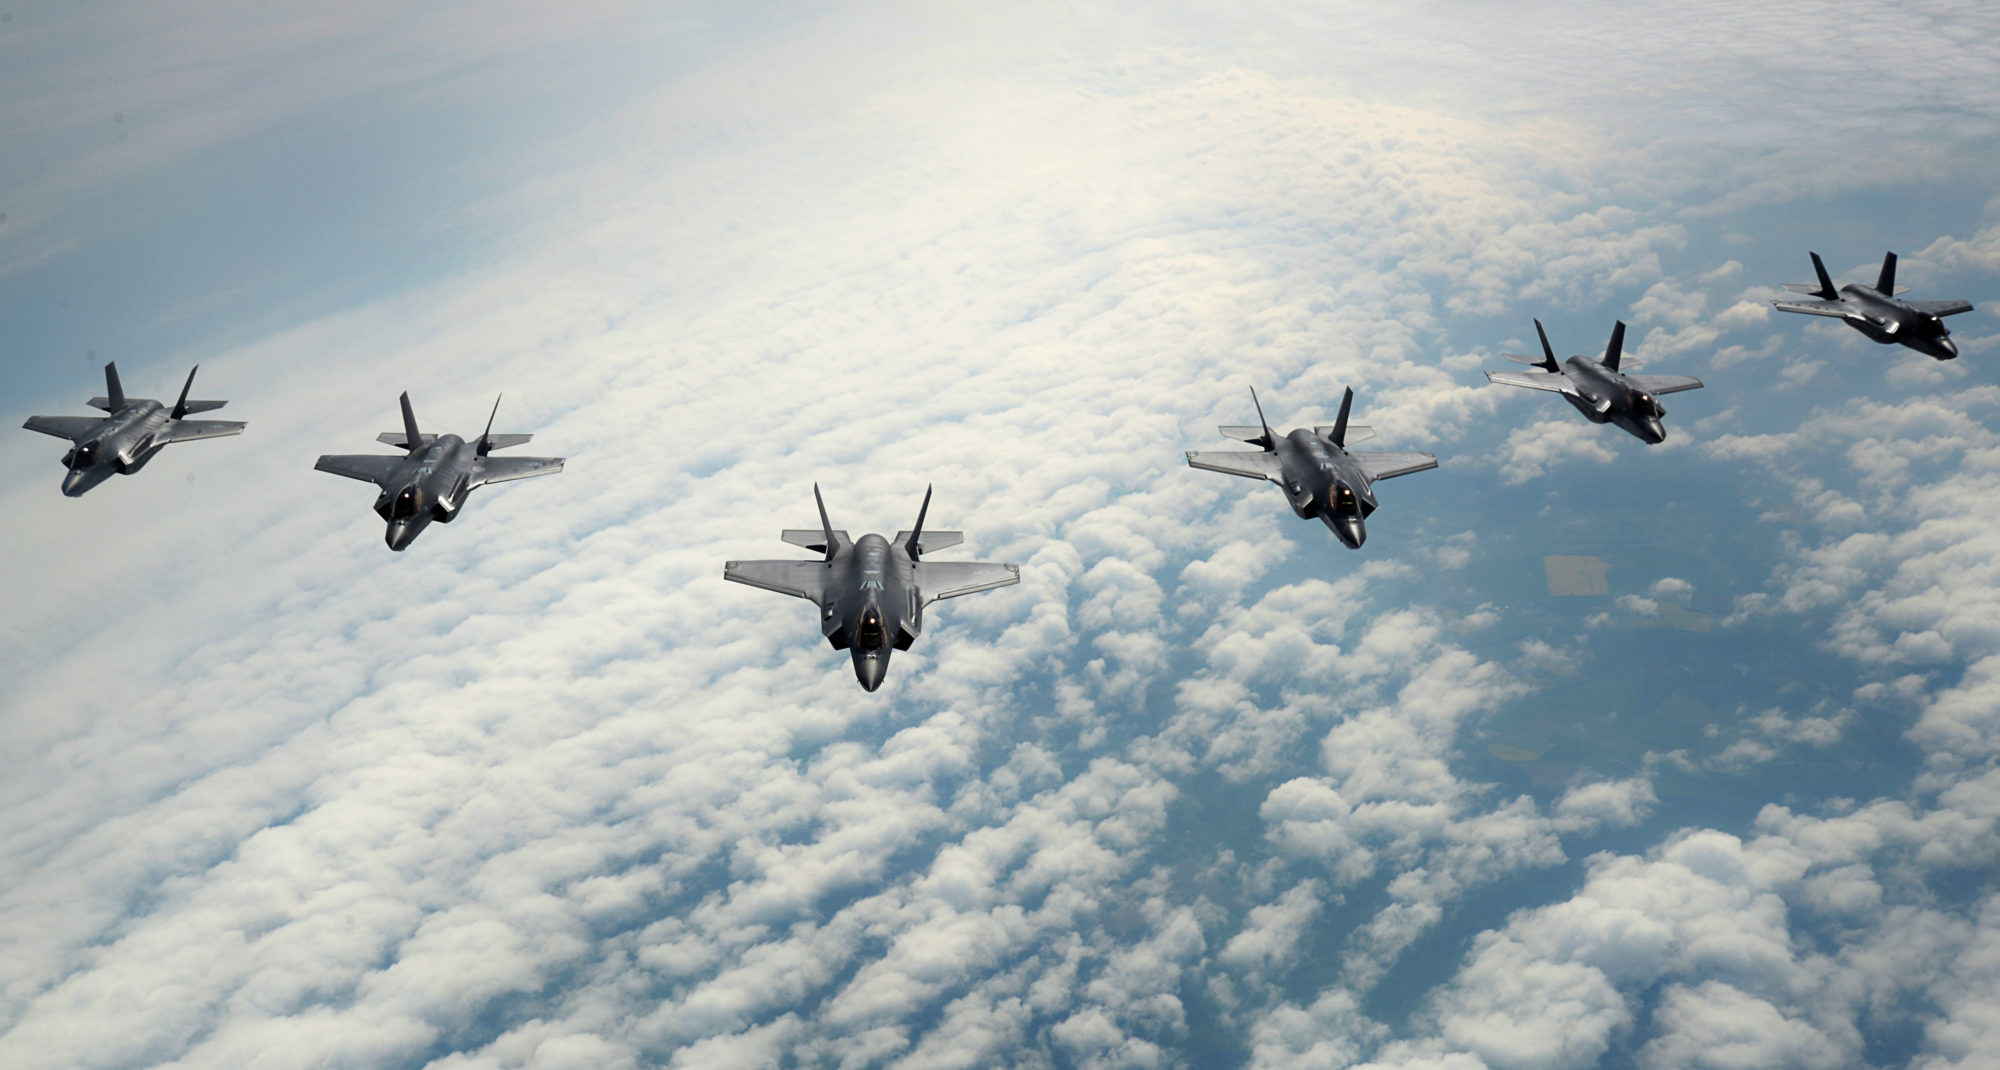 What You Should Know About the F-35 Program